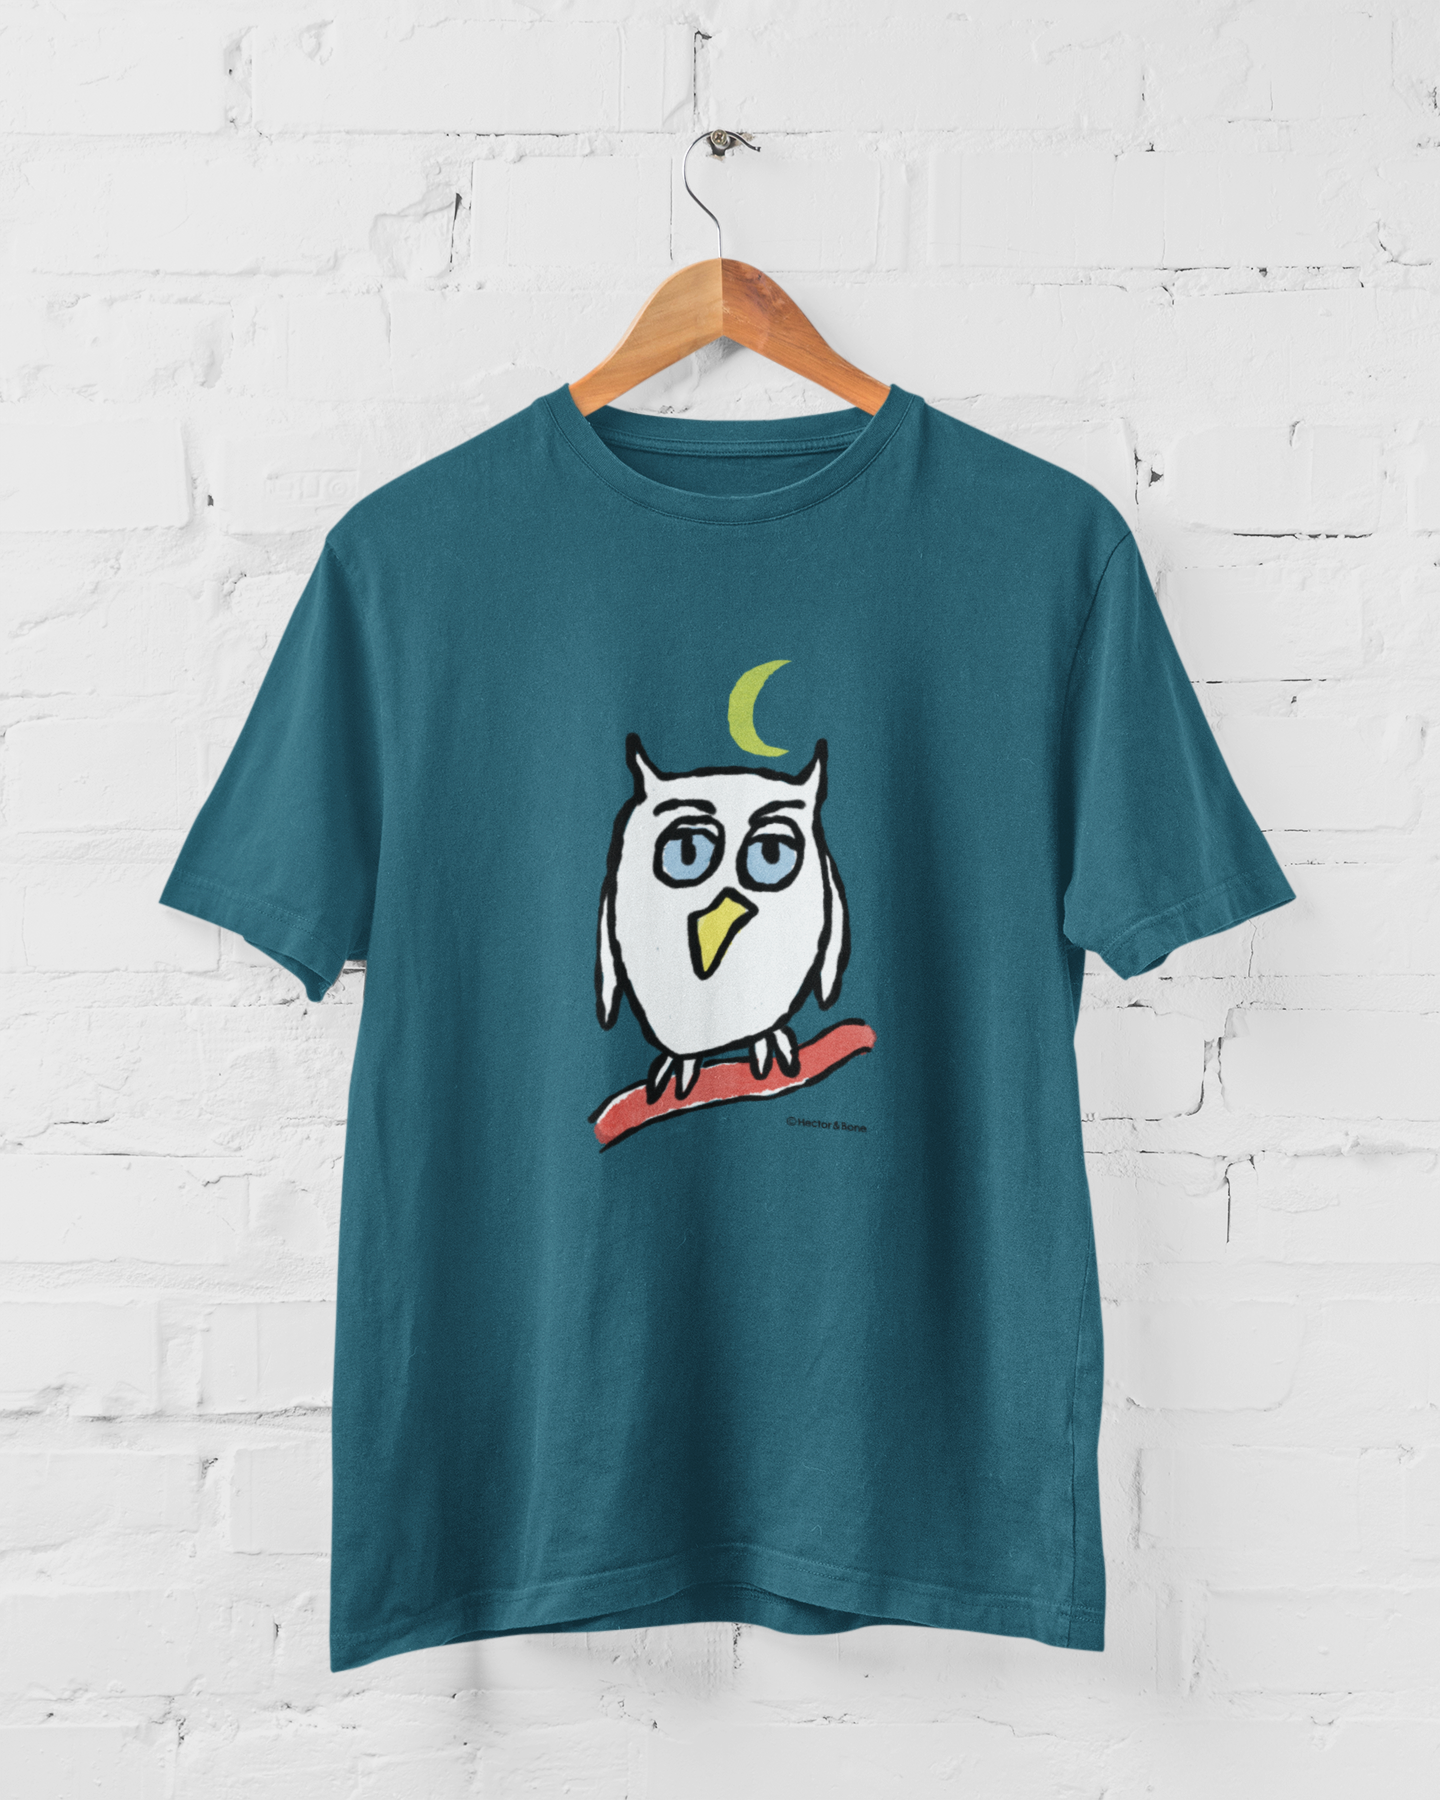 Night Owl T-shirt - Night blue colour vegan cute illustrated Owl T-shirts by Hector and Bone